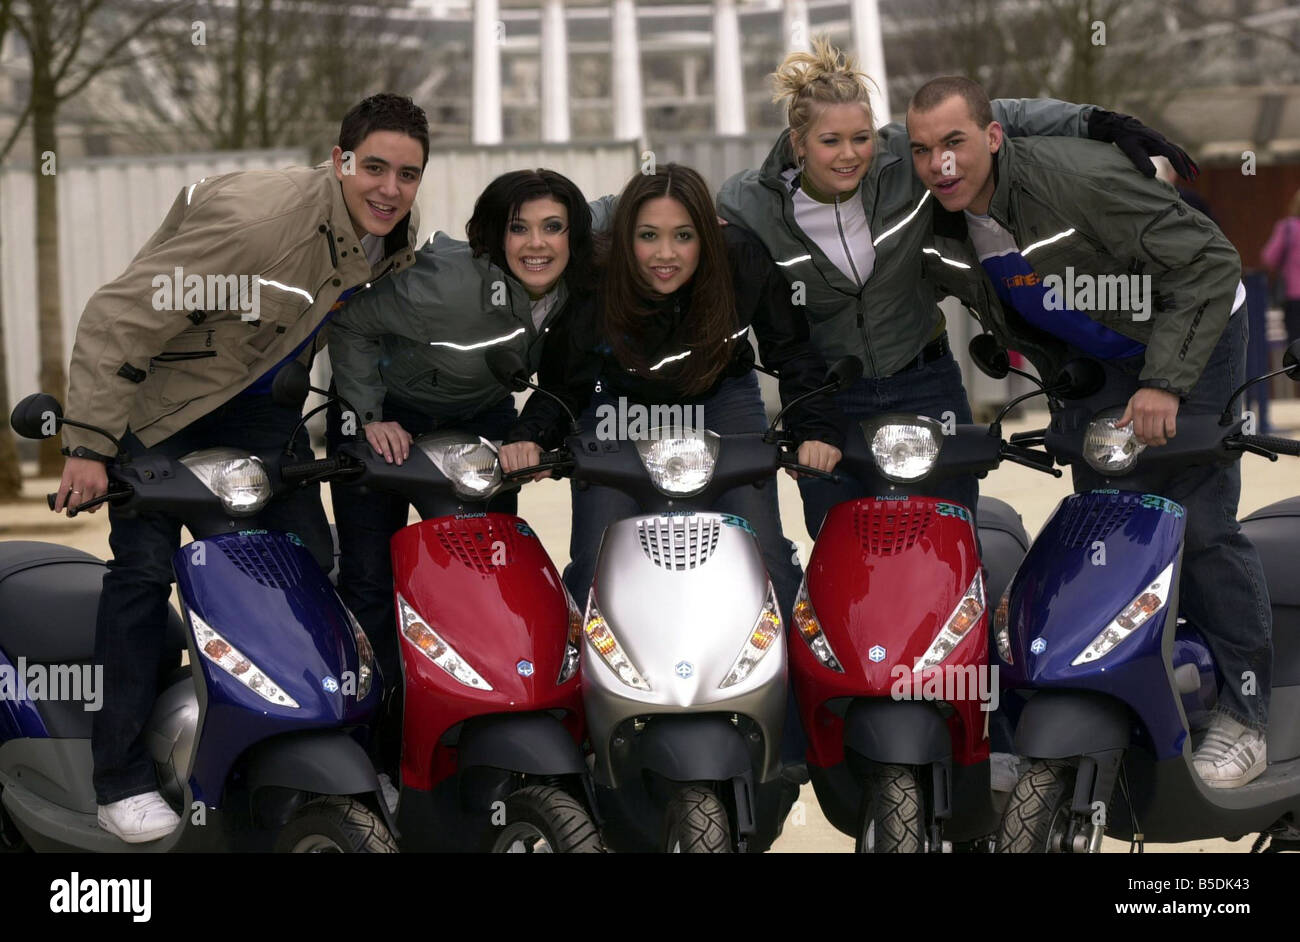 Popstars Hear Say Pop Group March 2001 Kym Marsh Danny Foster Myleene Klass Suzanne Shaw Noel Sullivan posing with motor scooters for a promotion shoot HearSay Stock Photo